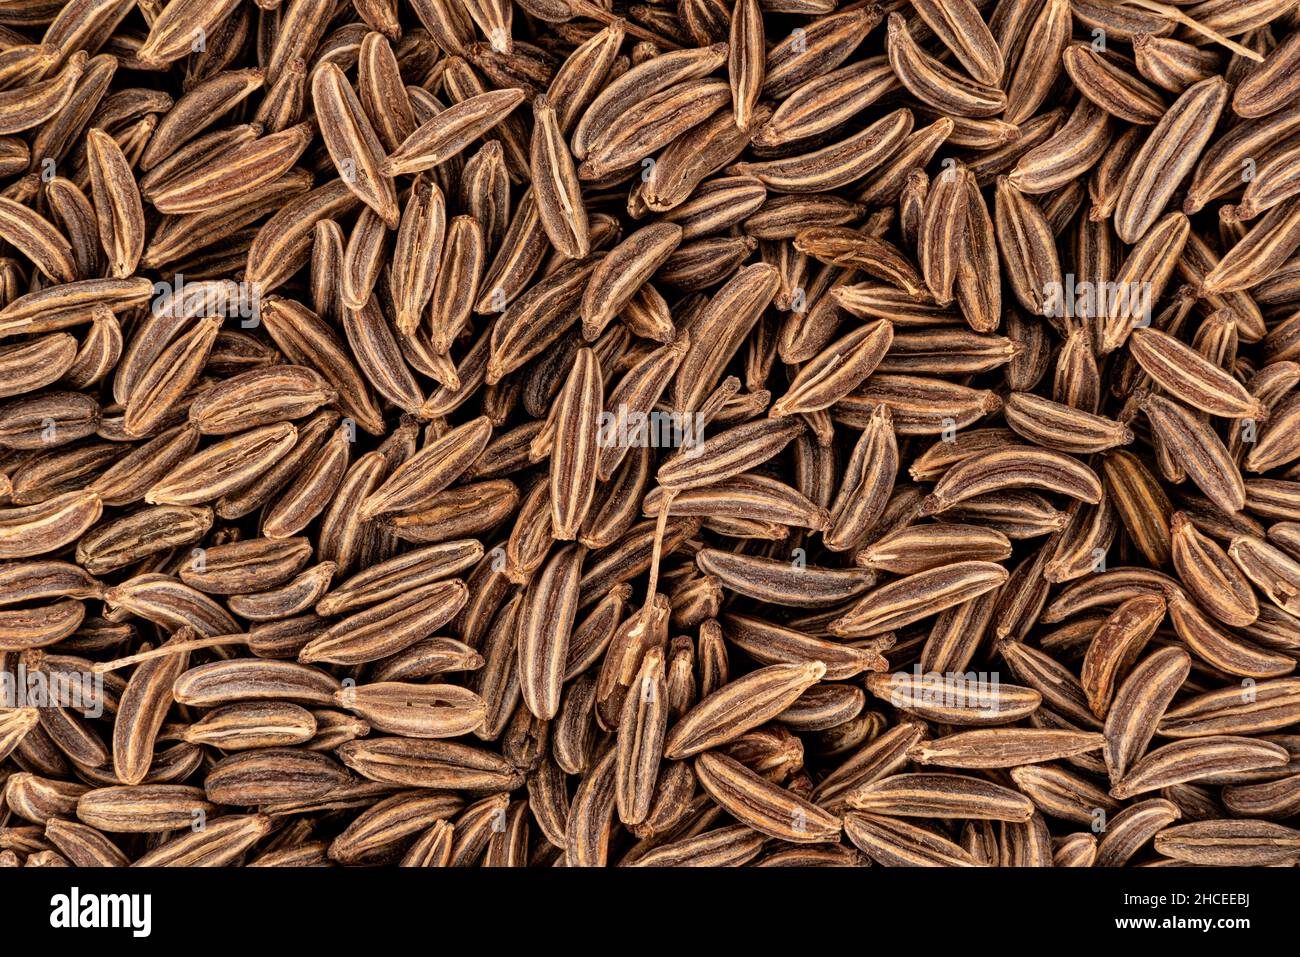 Closeup detail of caraway seeds meridian fennel - Carum carvi shot from above, image width 23mm Stock Photo